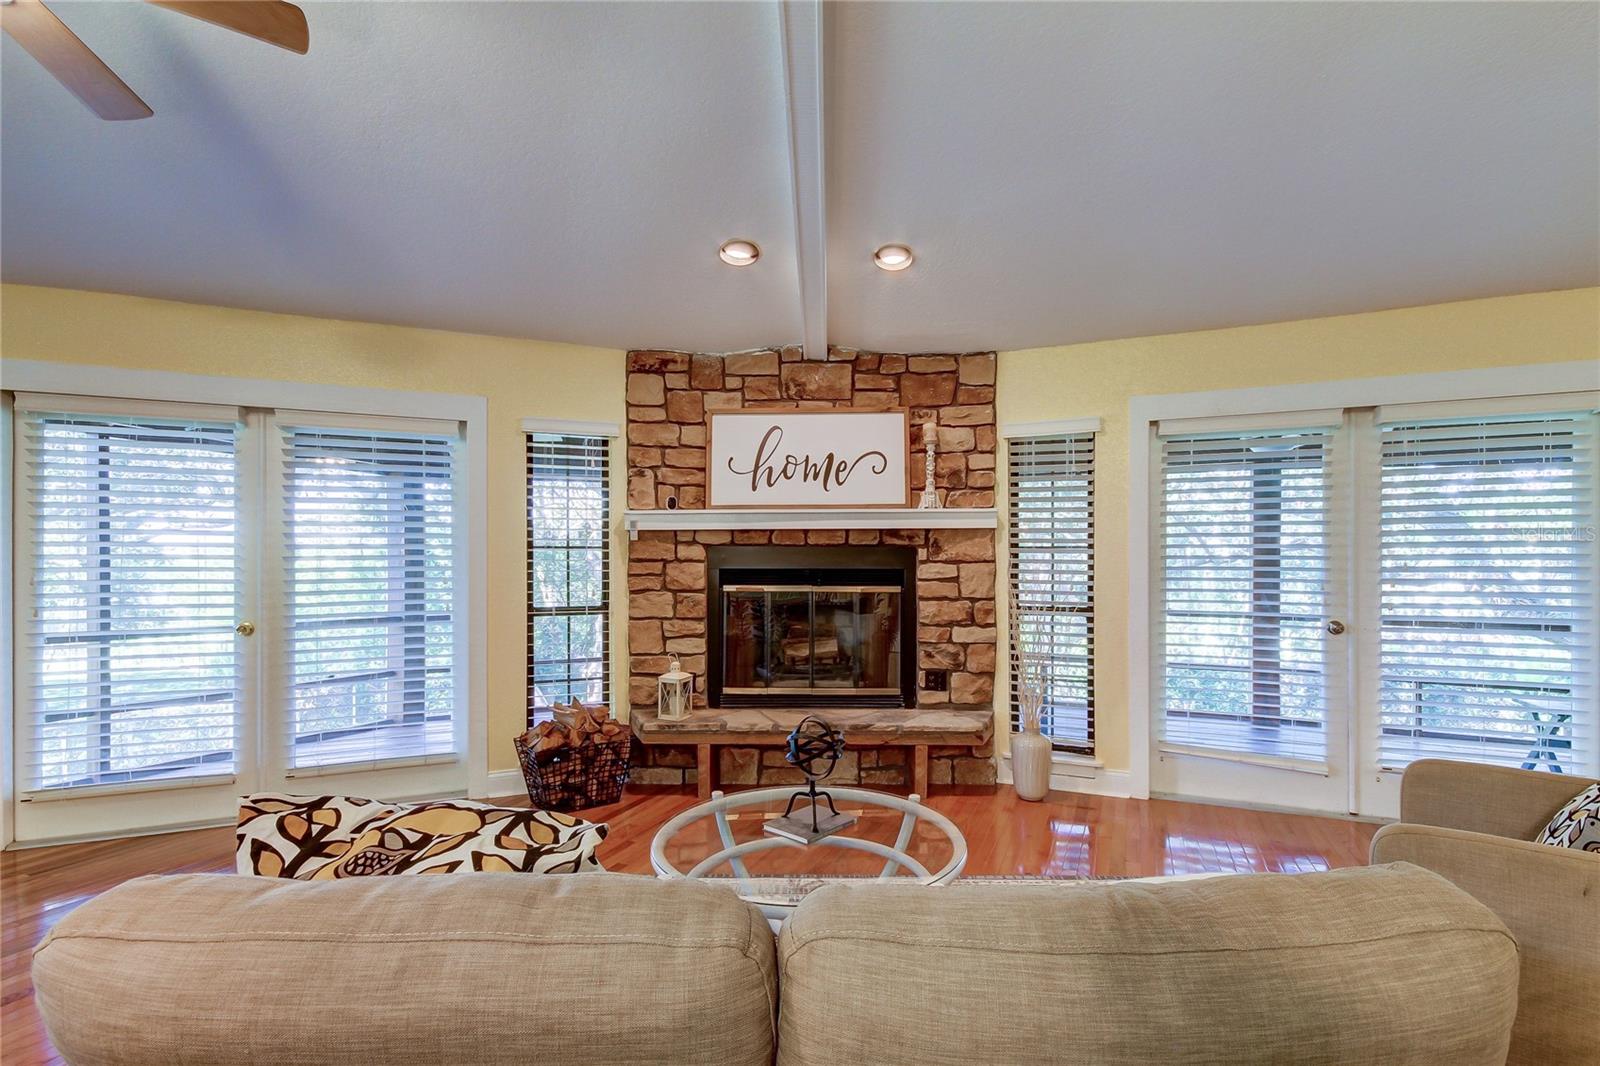 Fireplace; Doors Lead to Screened-in Porch